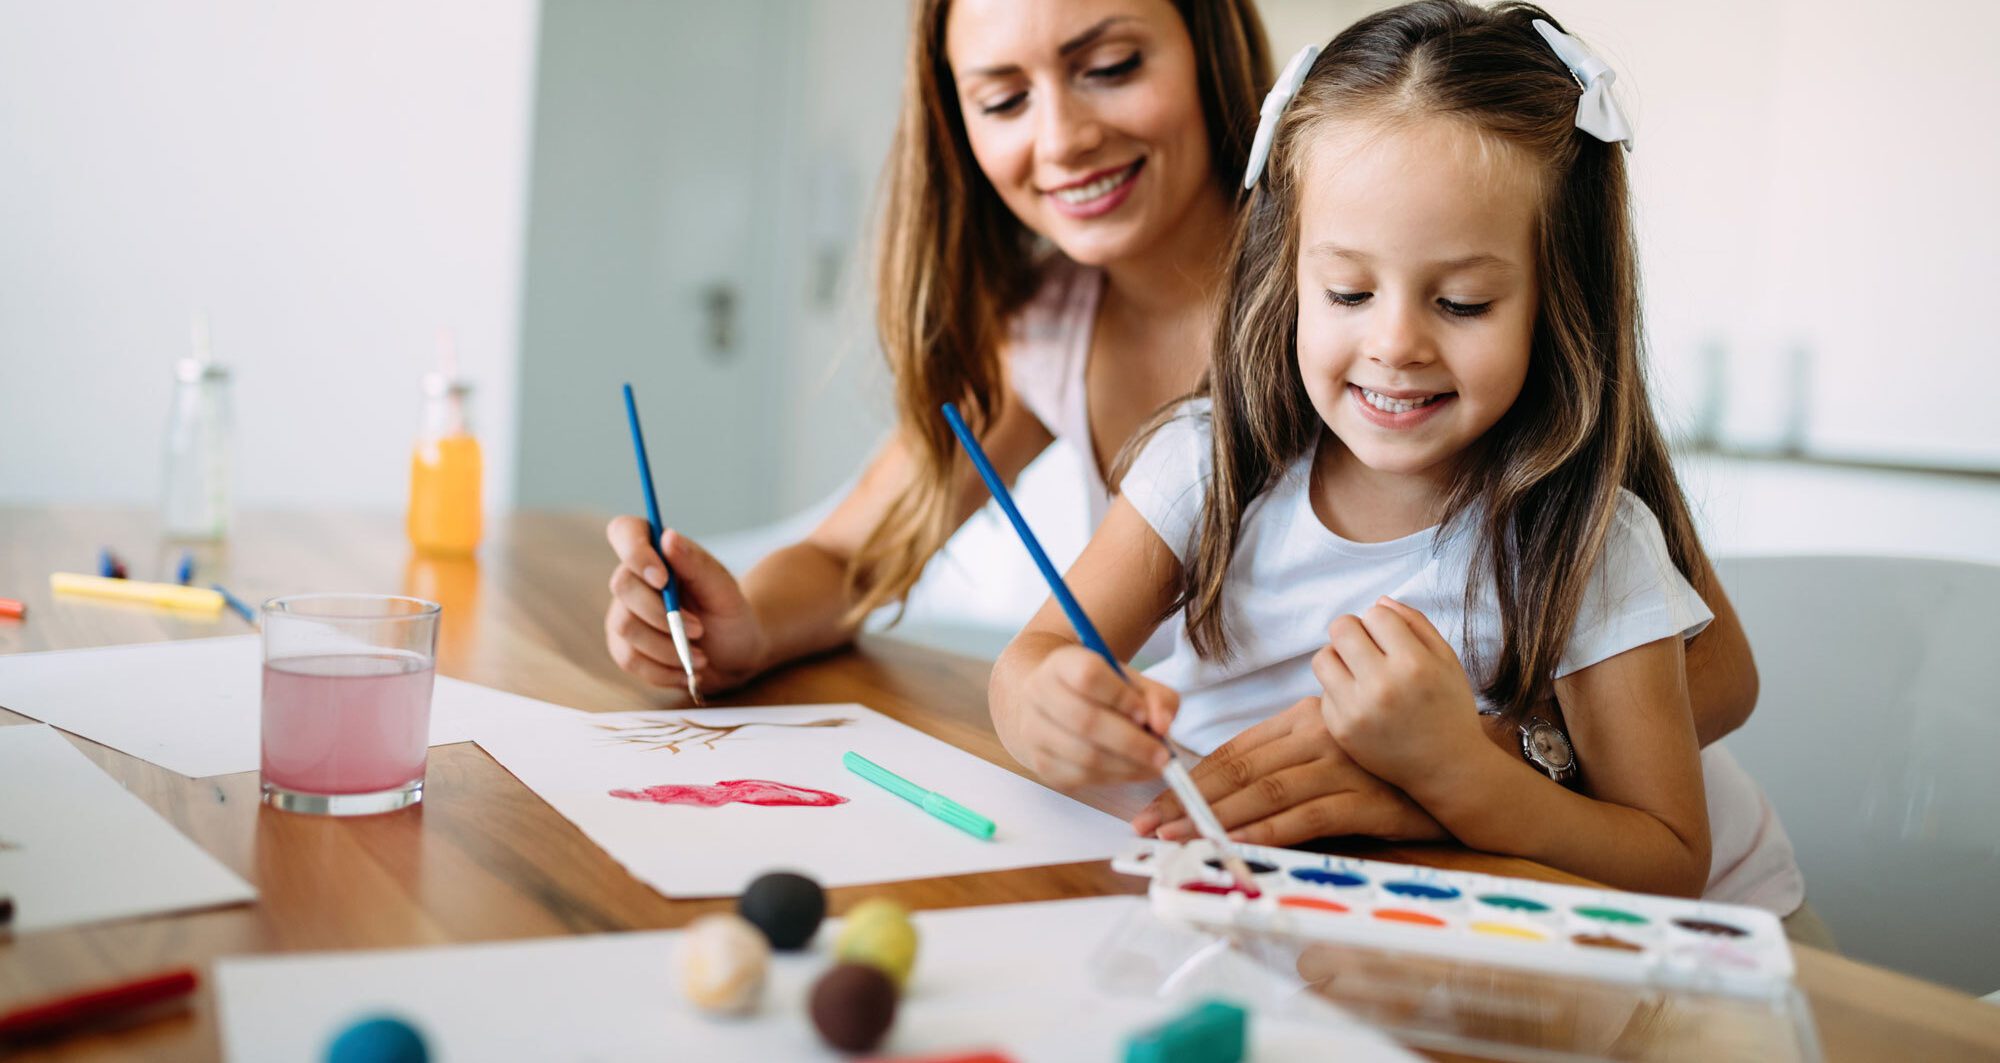 Mom and daughter painting - Virtual Prep of Washington - Tuition-free online public school